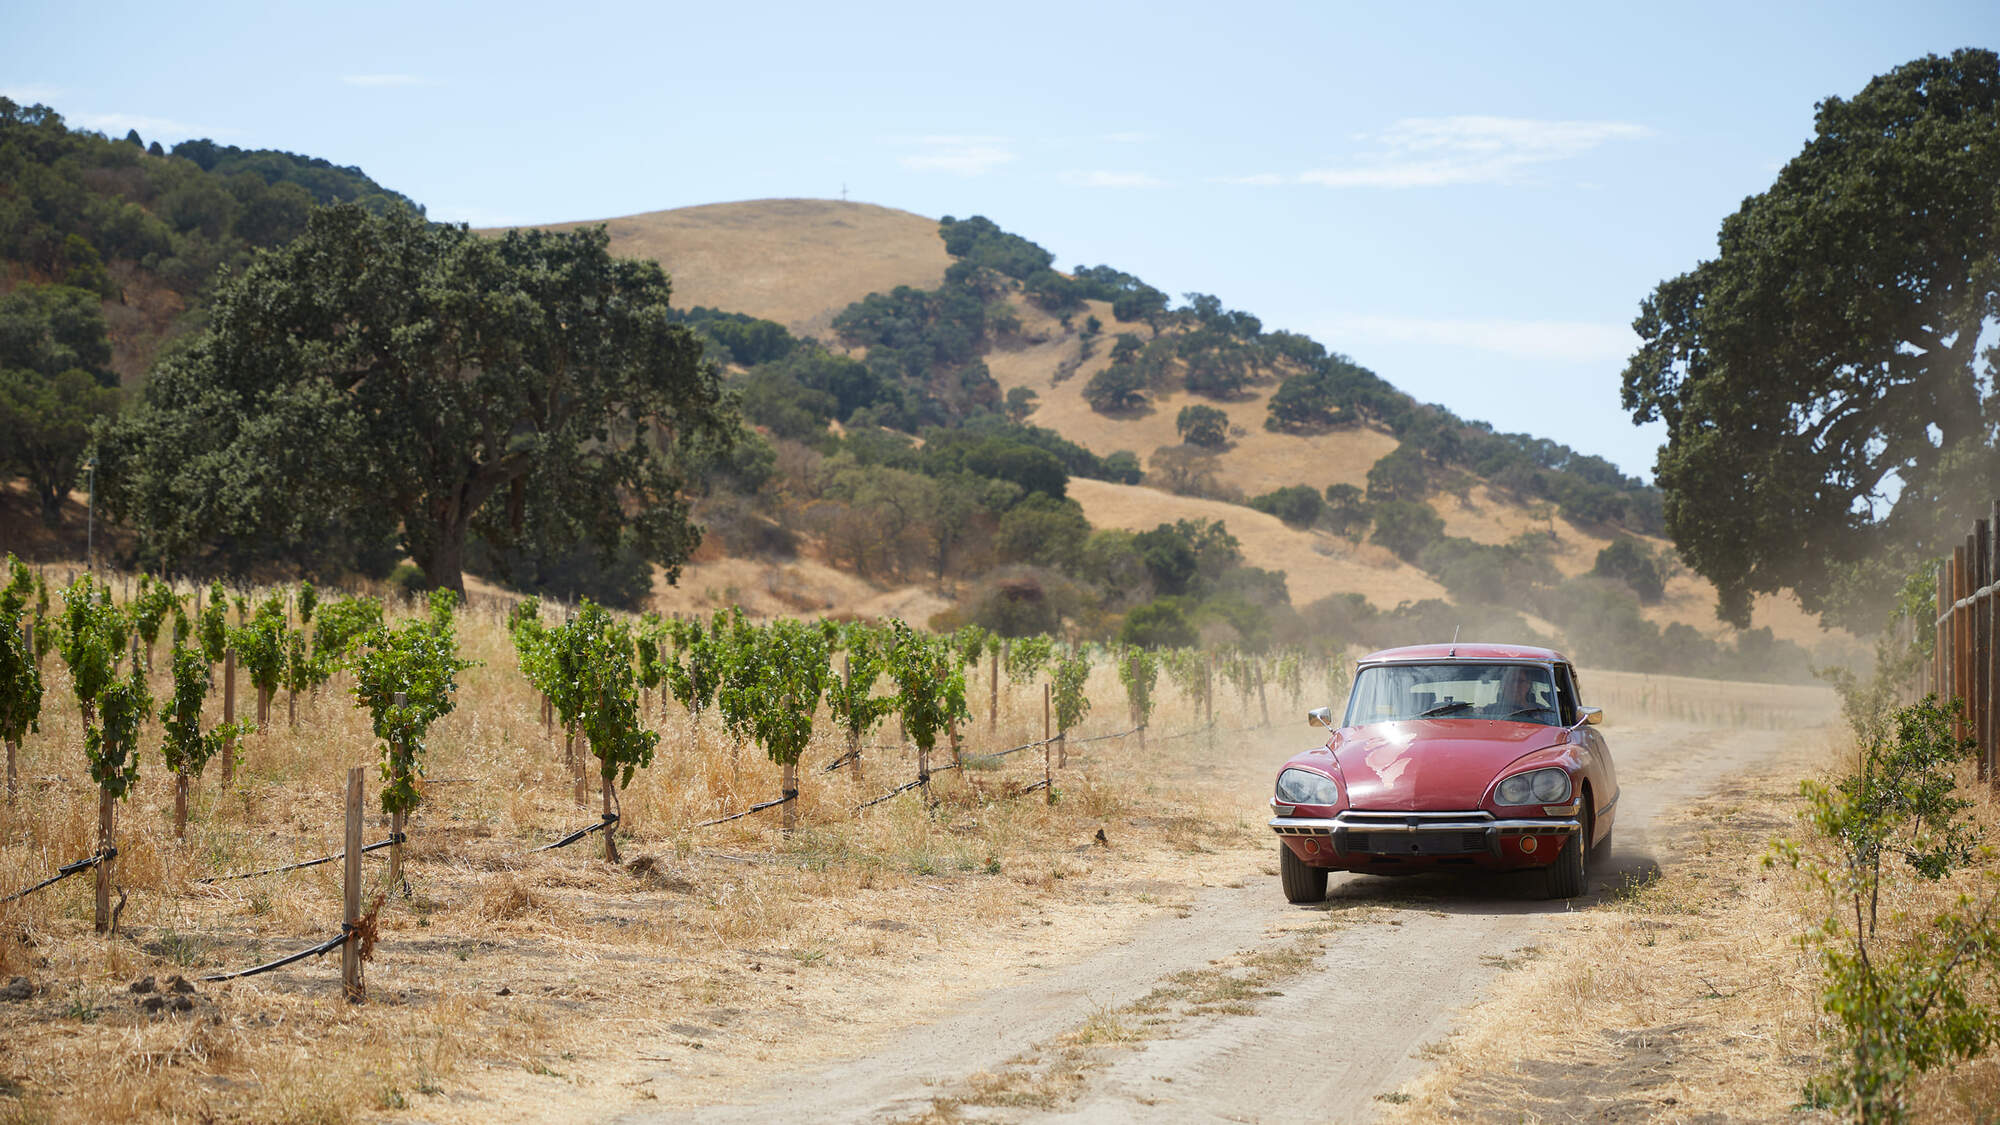 Maze Row producer Randall Grahm driving through his vineyard in a red vintage car.